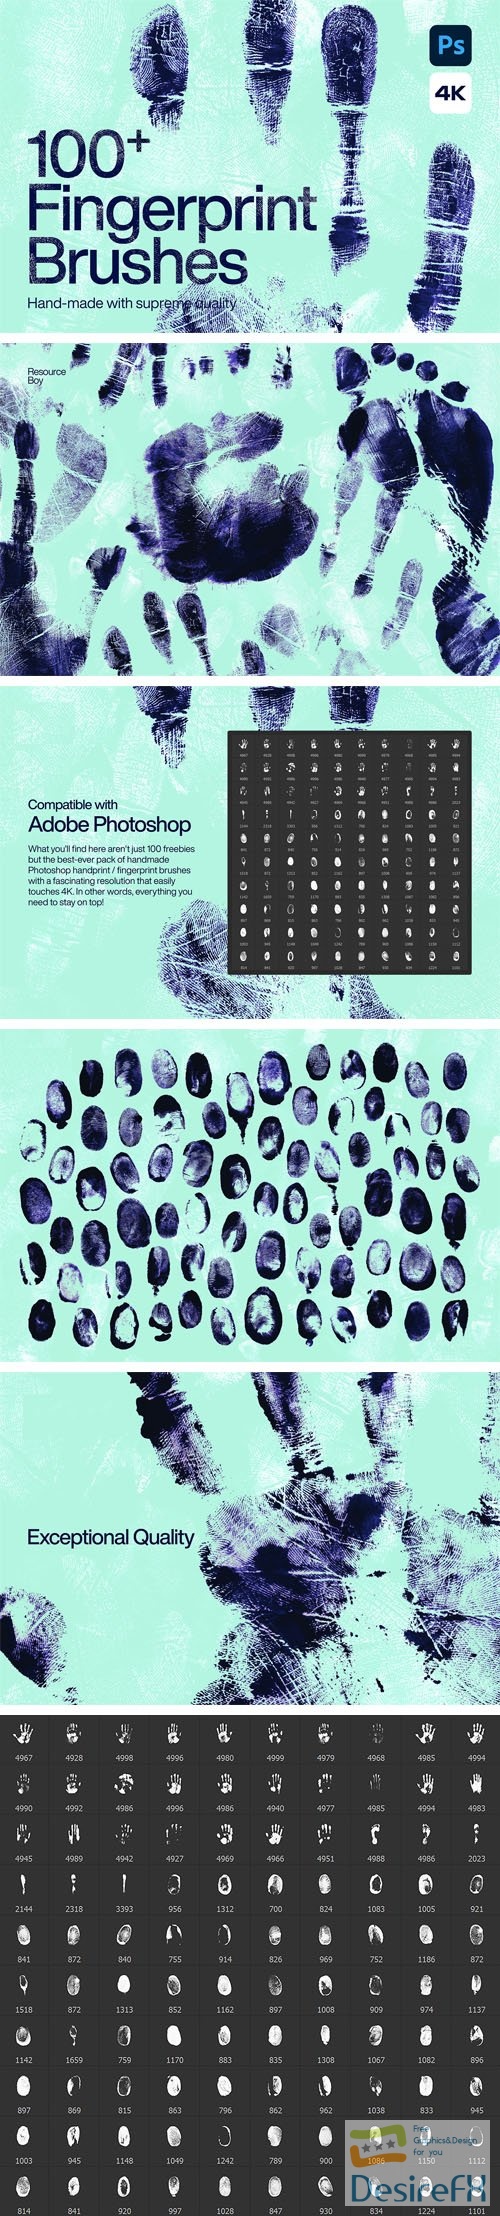 100+ Fingerprint Photoshop Brushes - Hand Made with Supreme Quality